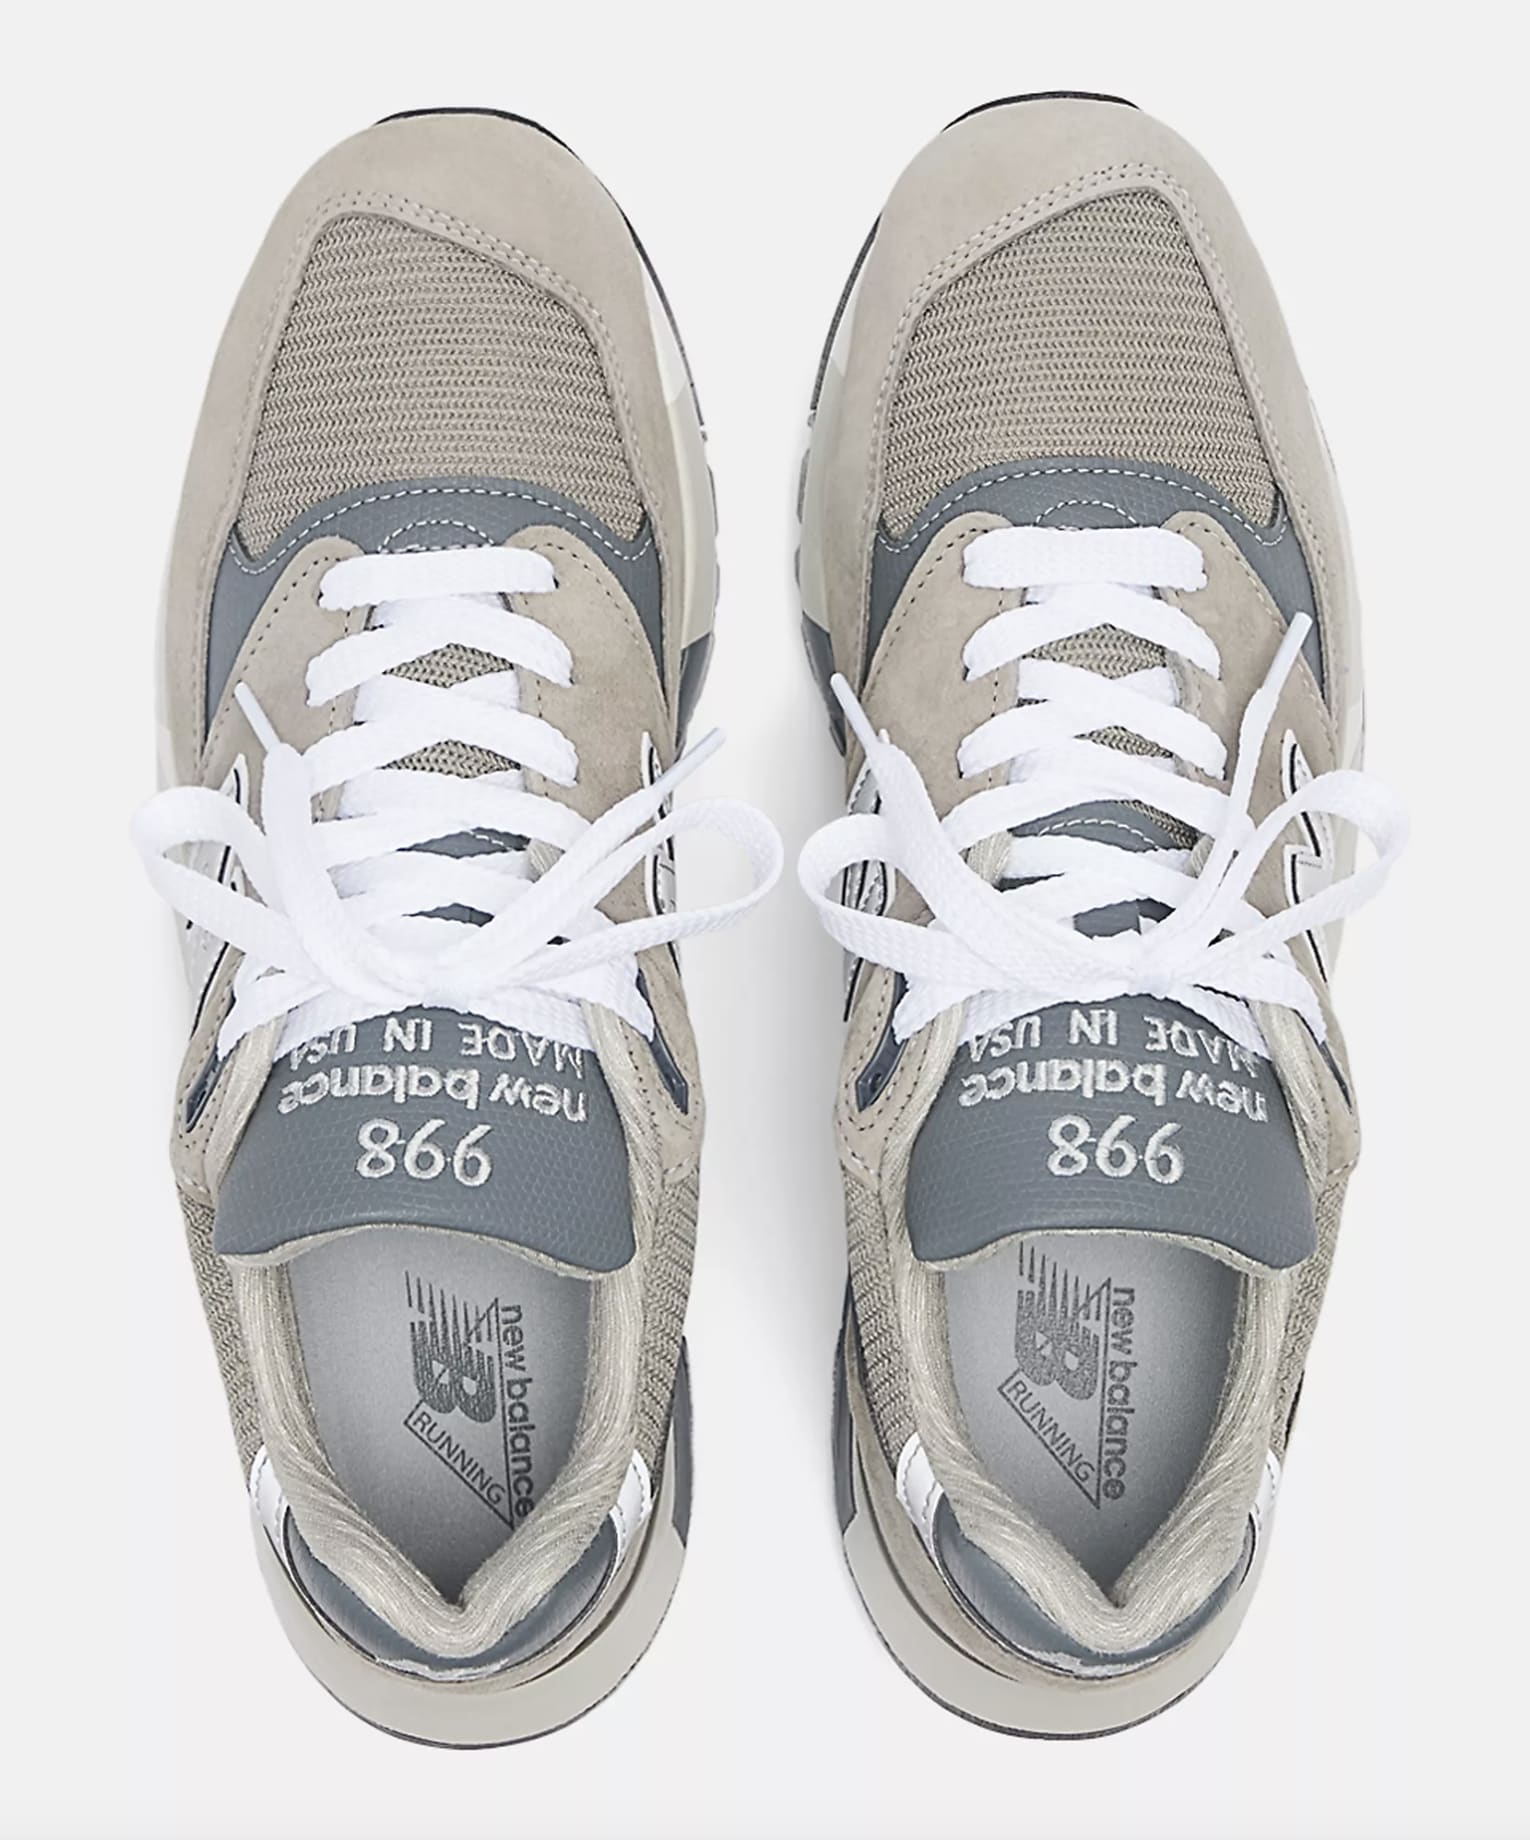 New Balance Brings Back This OG 998 Colorway | Complex